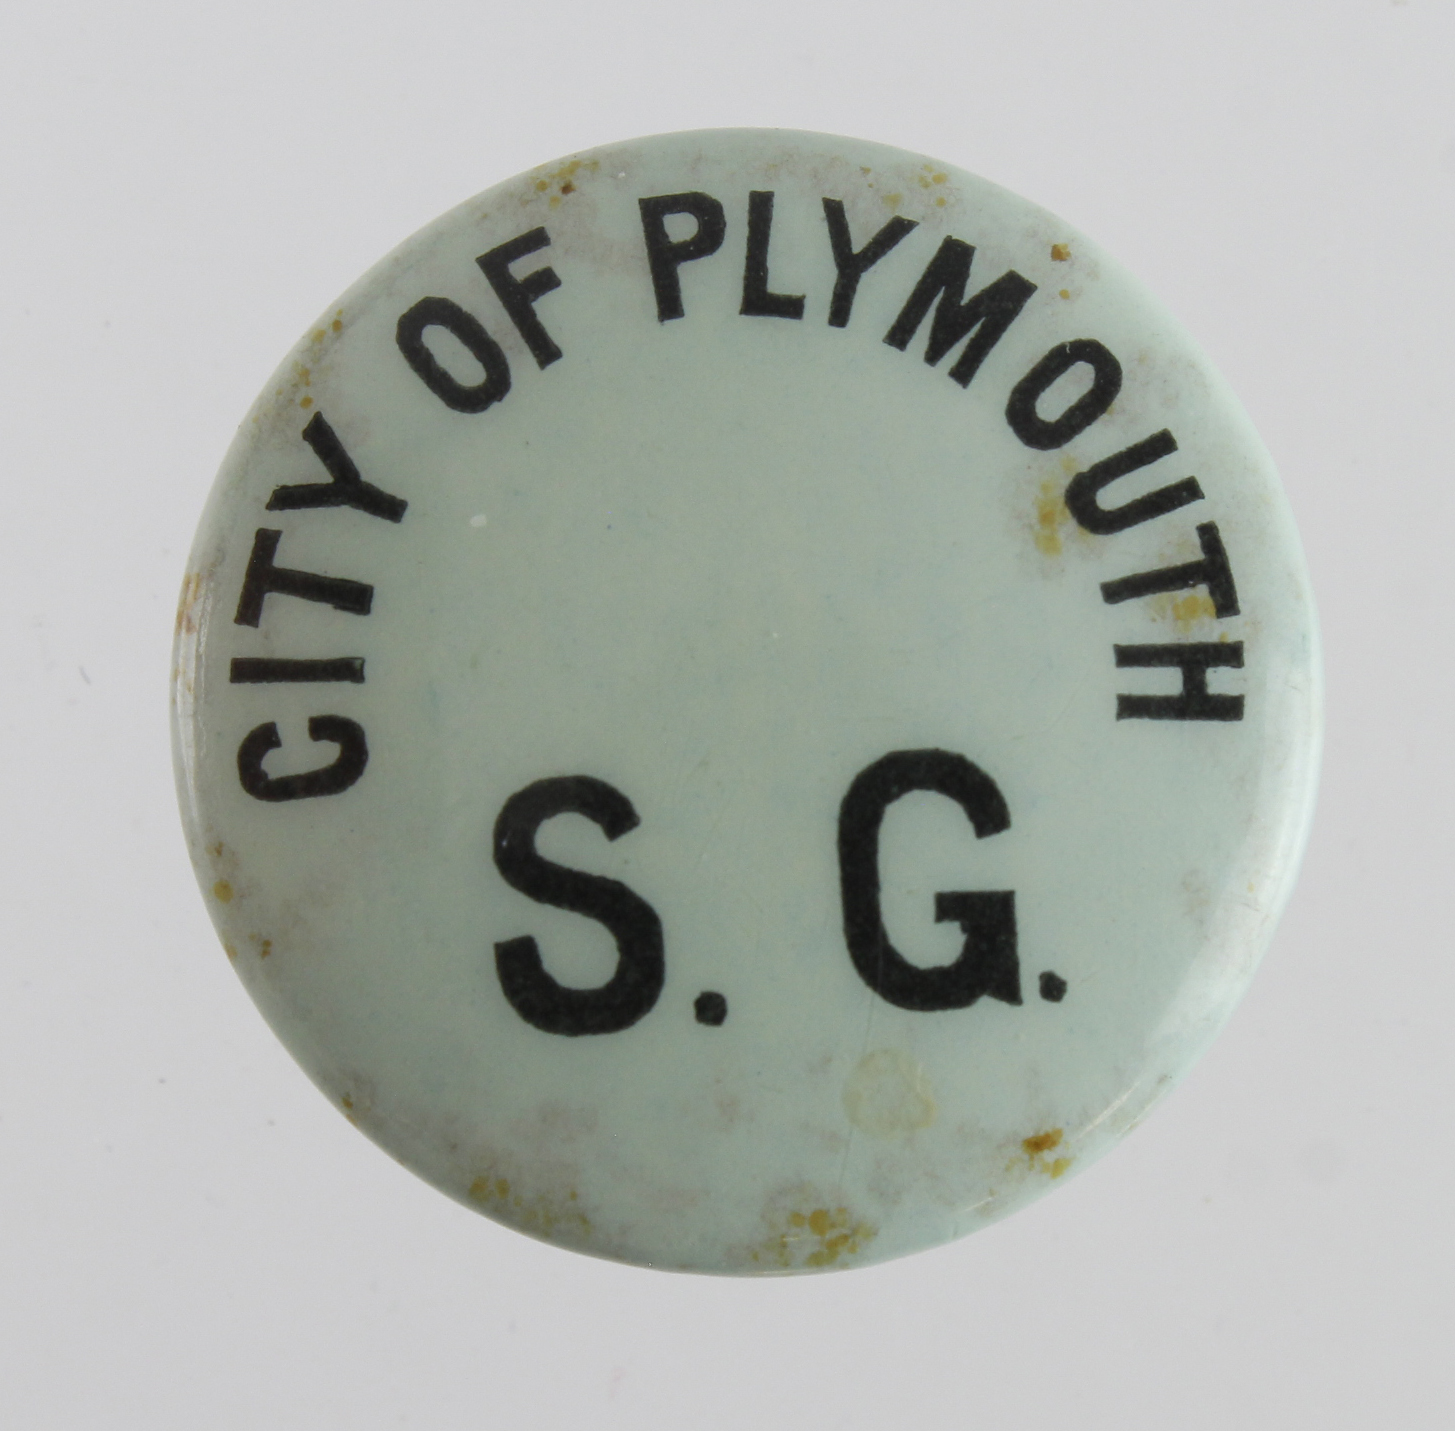 Voluntary Training Corps (poss.) badge, City of Plymouth, S.G. (celluloid & metal badge) the S.G.